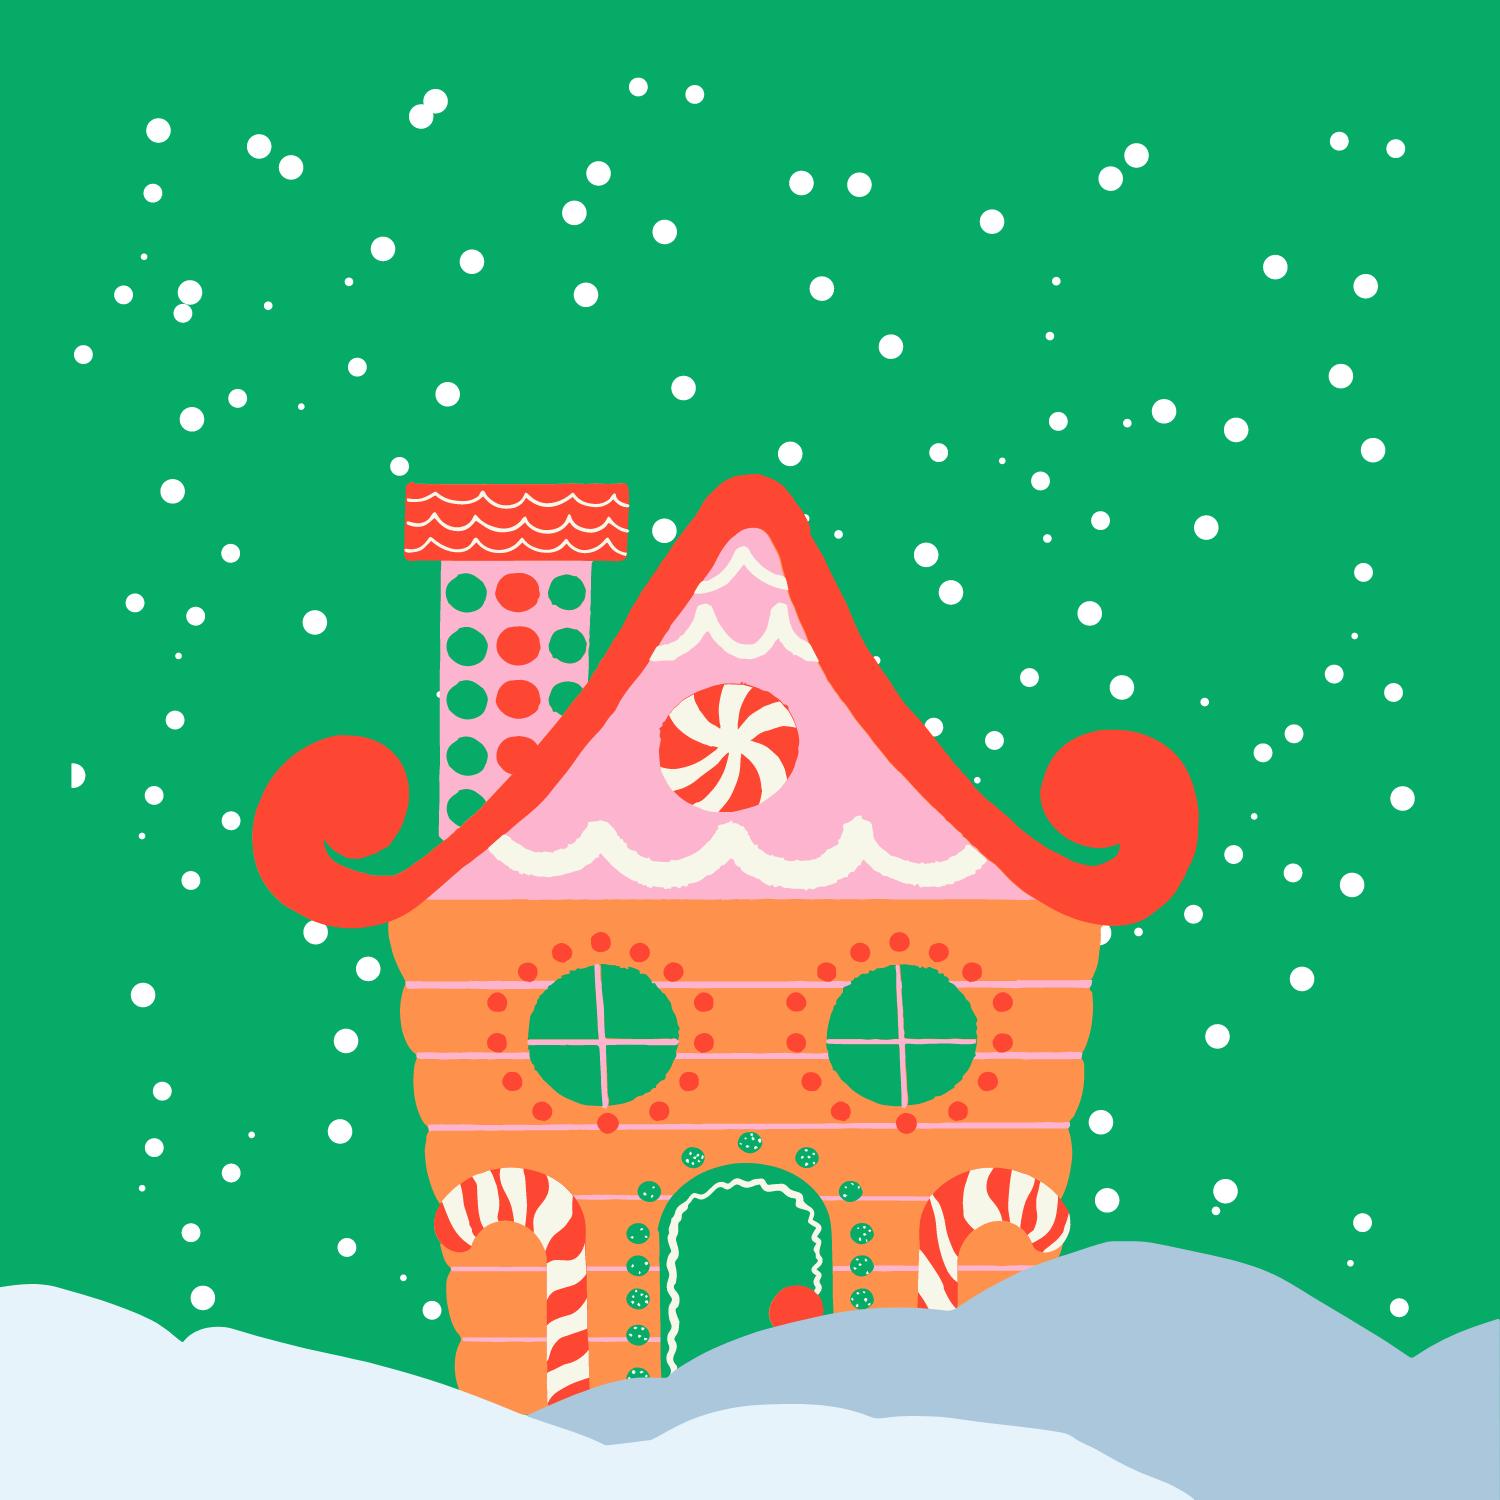 Gingerbread houses are a well known tradition done every year. This year we should forget about gingerbread houses and spend the holidays relieving the stress from the school year, instead of spending time  on a another stressful task.